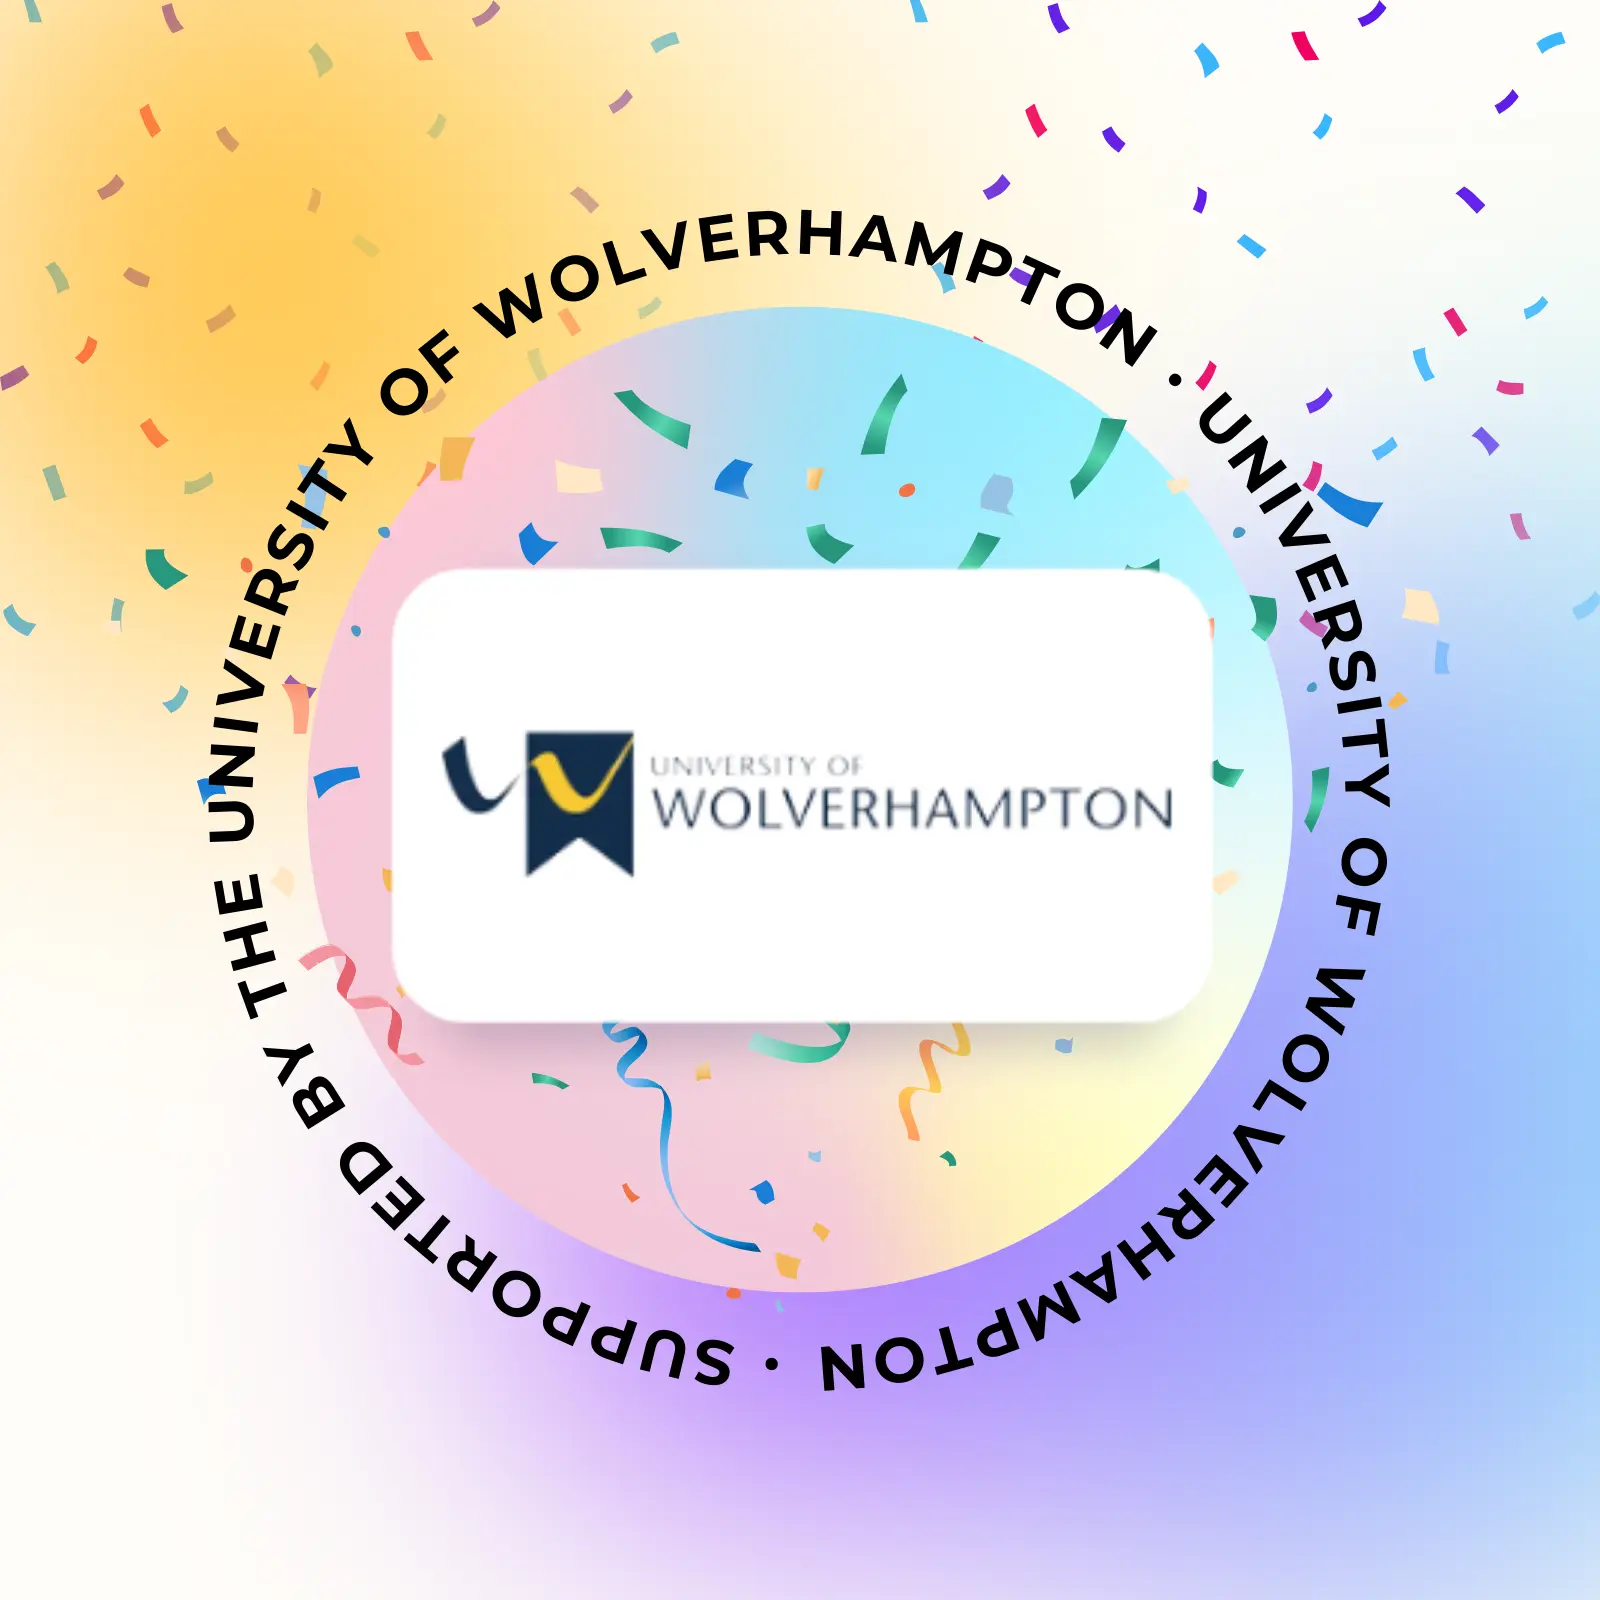 Supported By the University of Wolverhampton